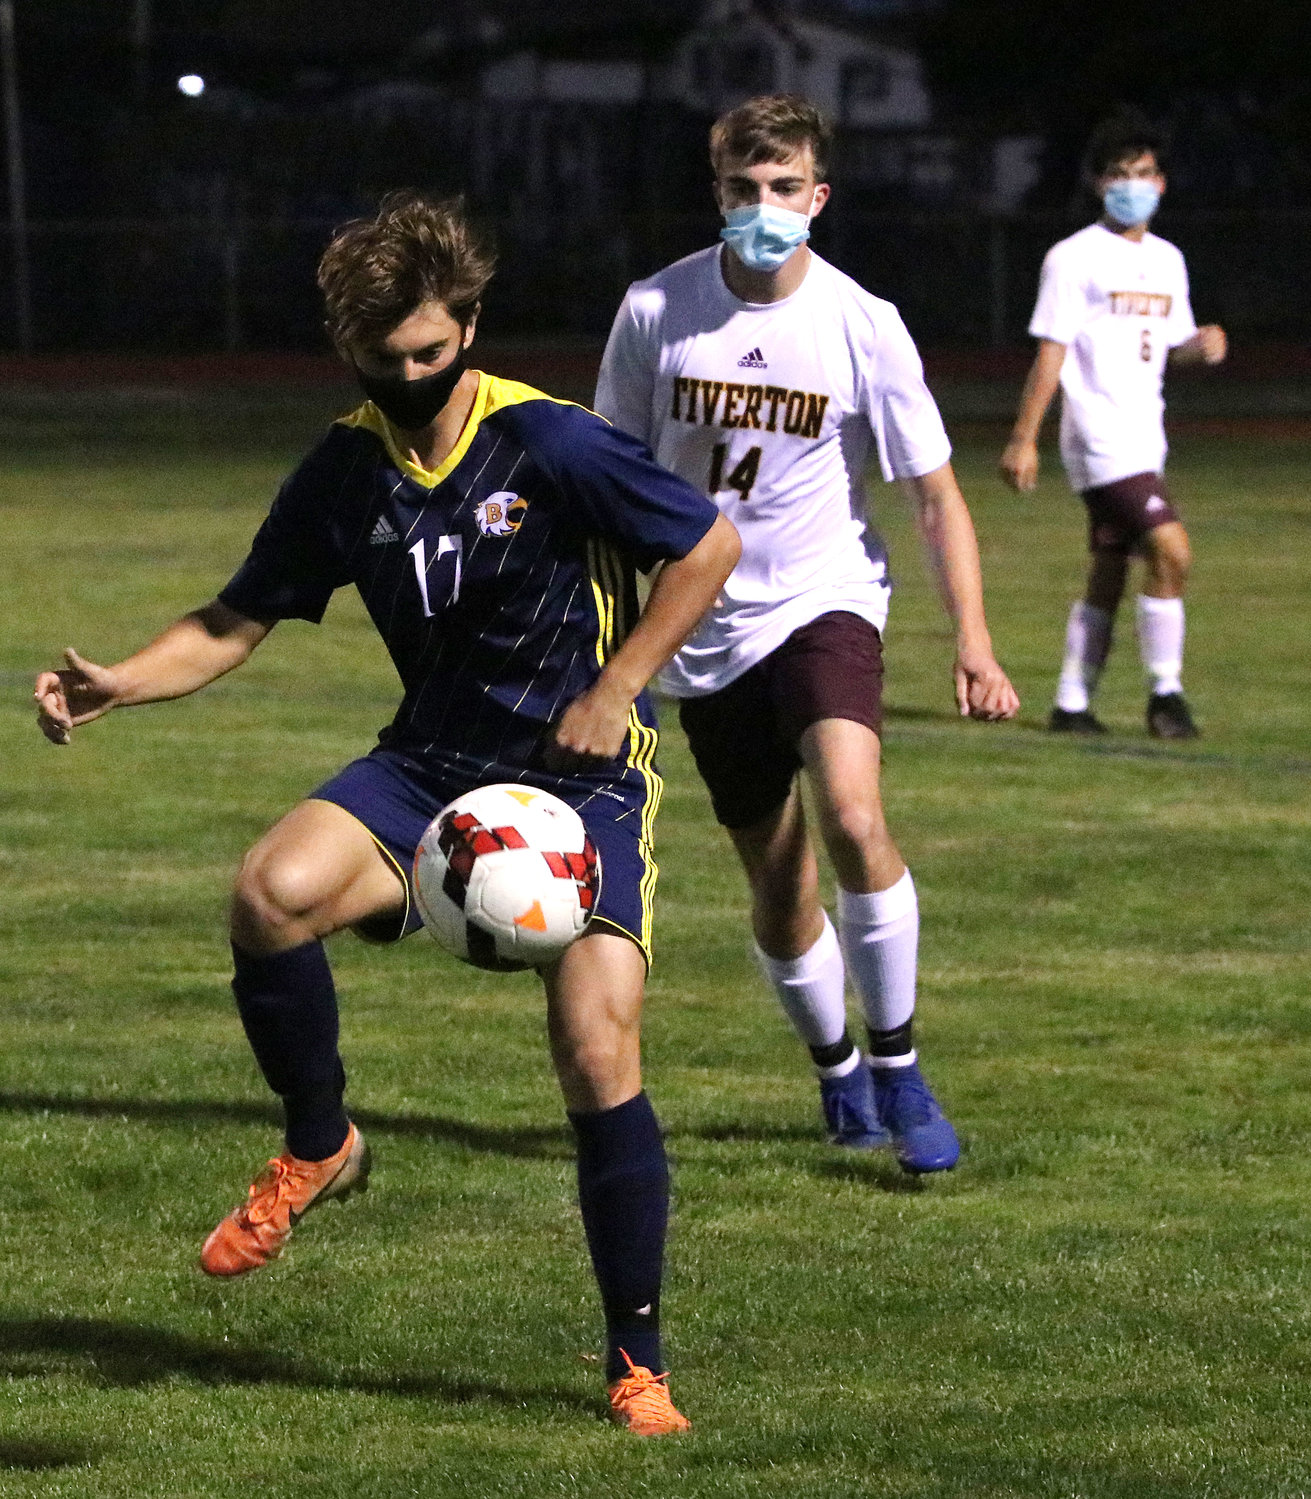 Barrington High School's Nick Rockwell controls the ball while a Tiverton player moves in. The Eagles tied the Tigers 0-0 in the non-league game.